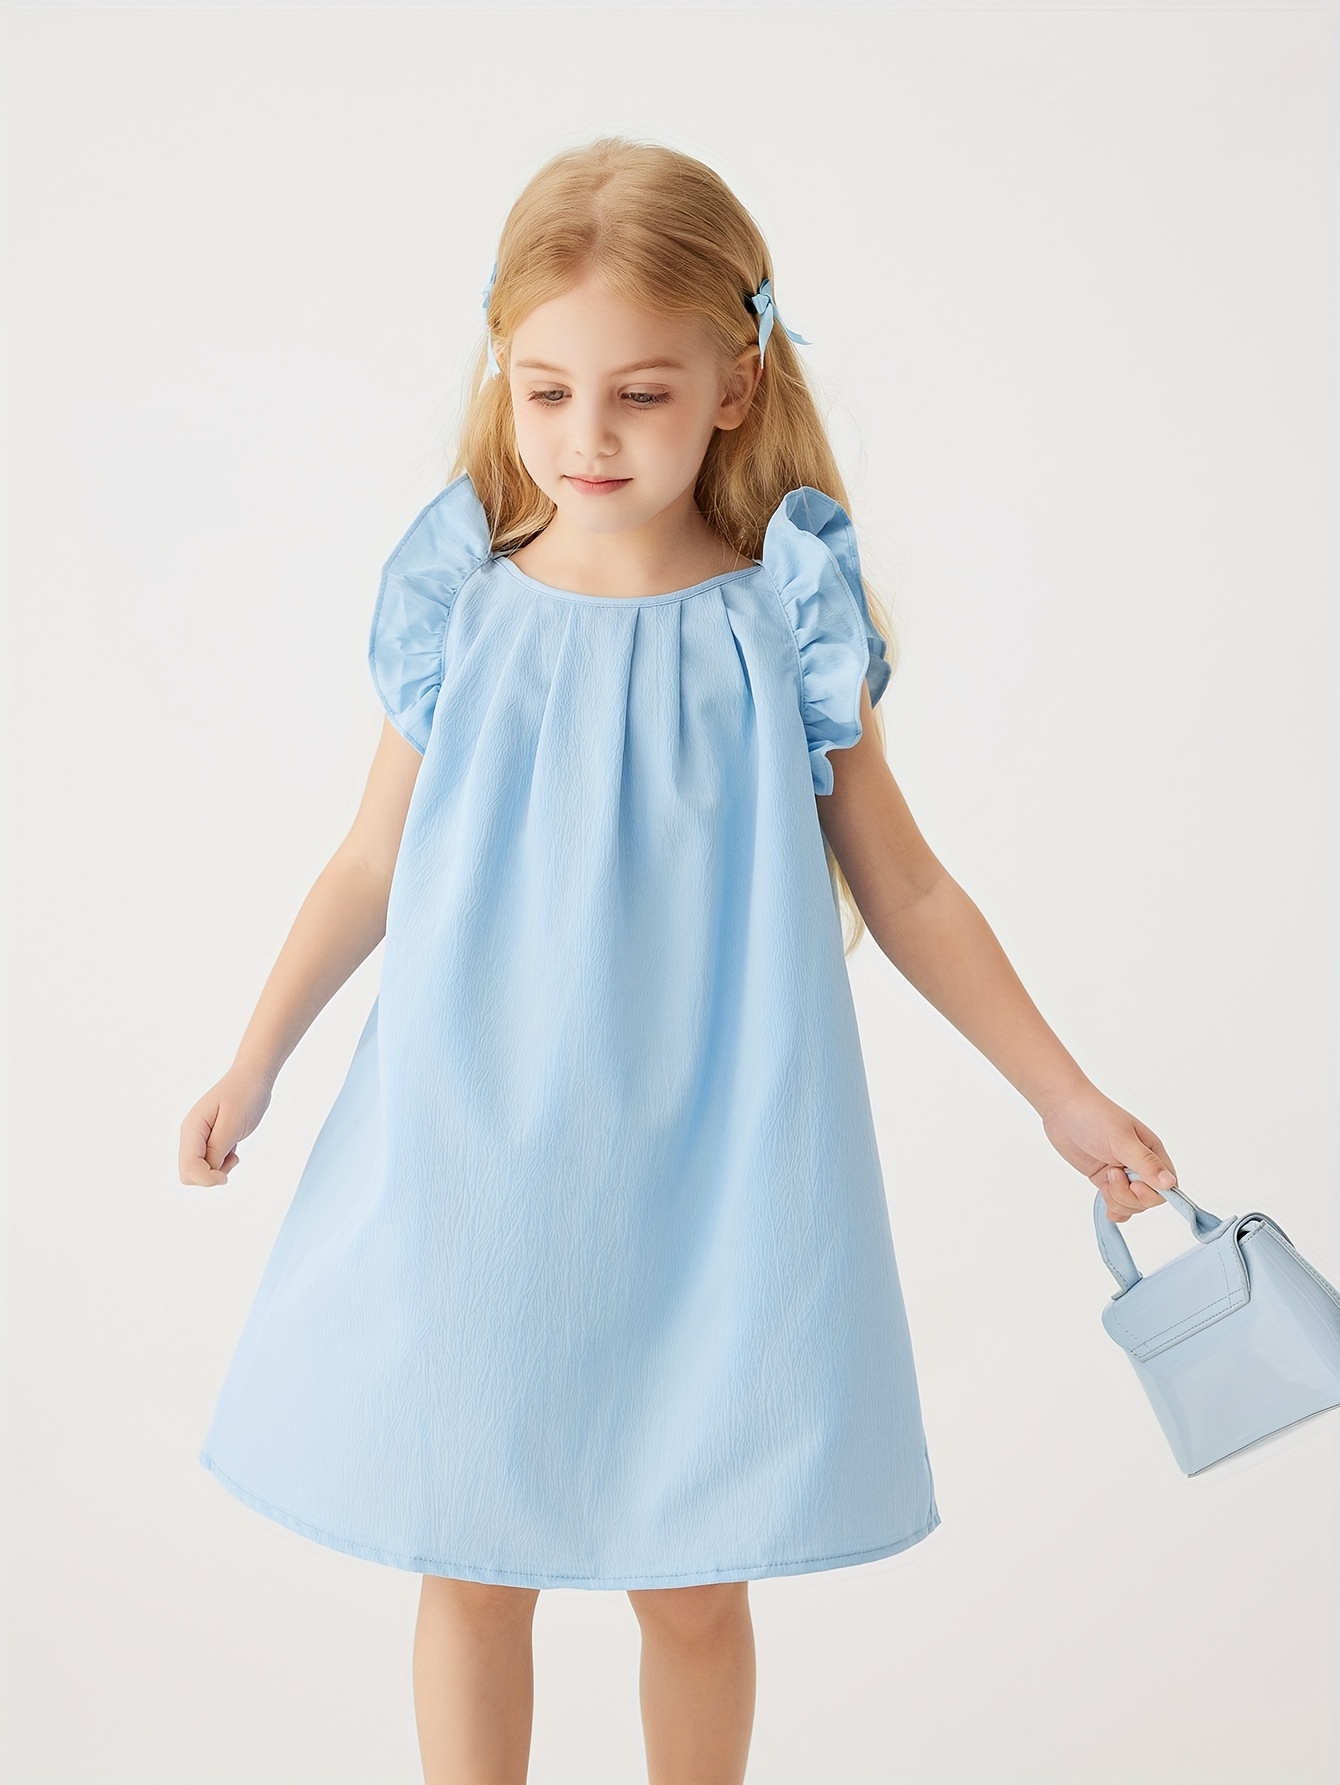 Dress Up Baby - Cute children's clothes